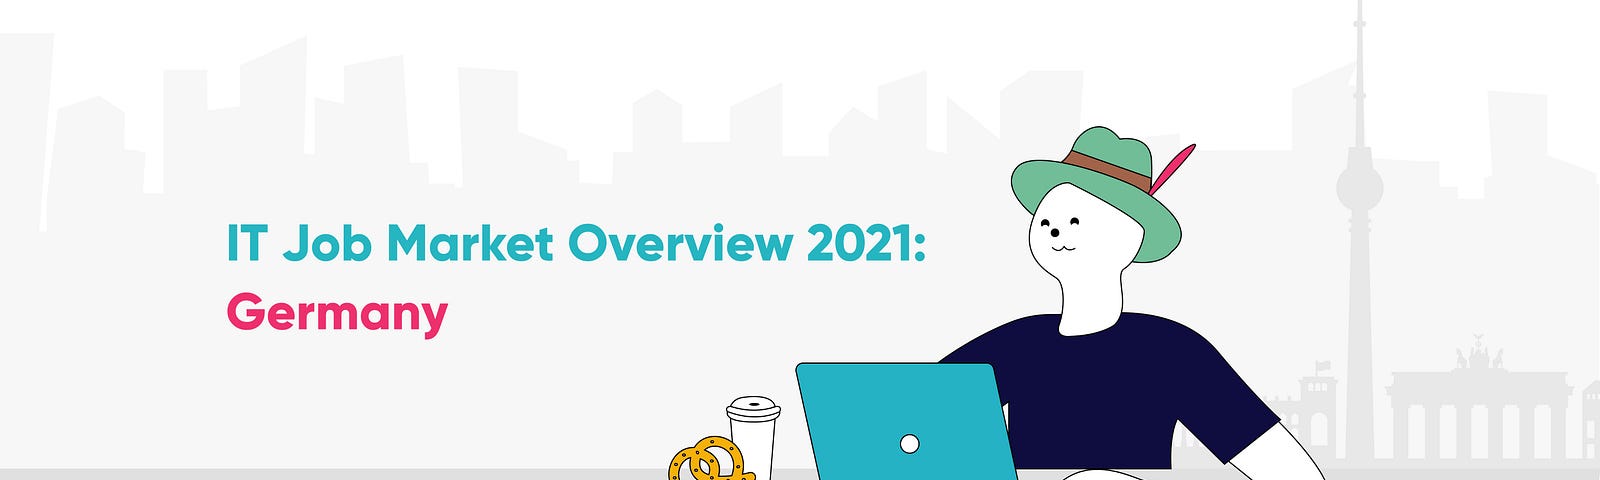 IT Job Market Overview 2021: Germany | MagicHire.co